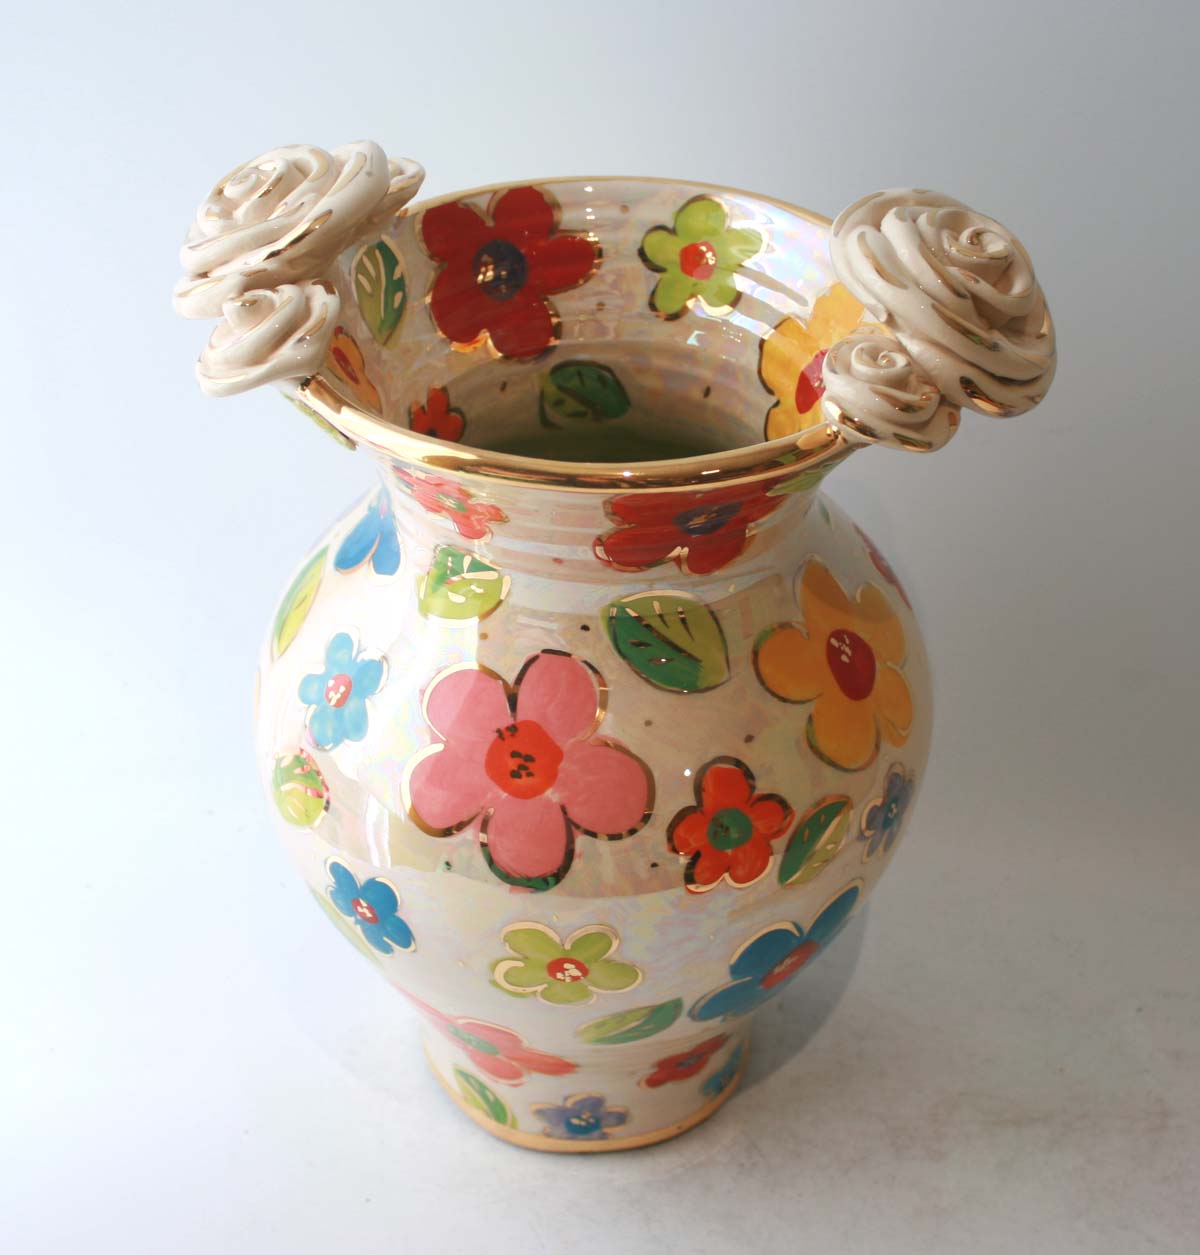 Large Fat Vase in Daisy